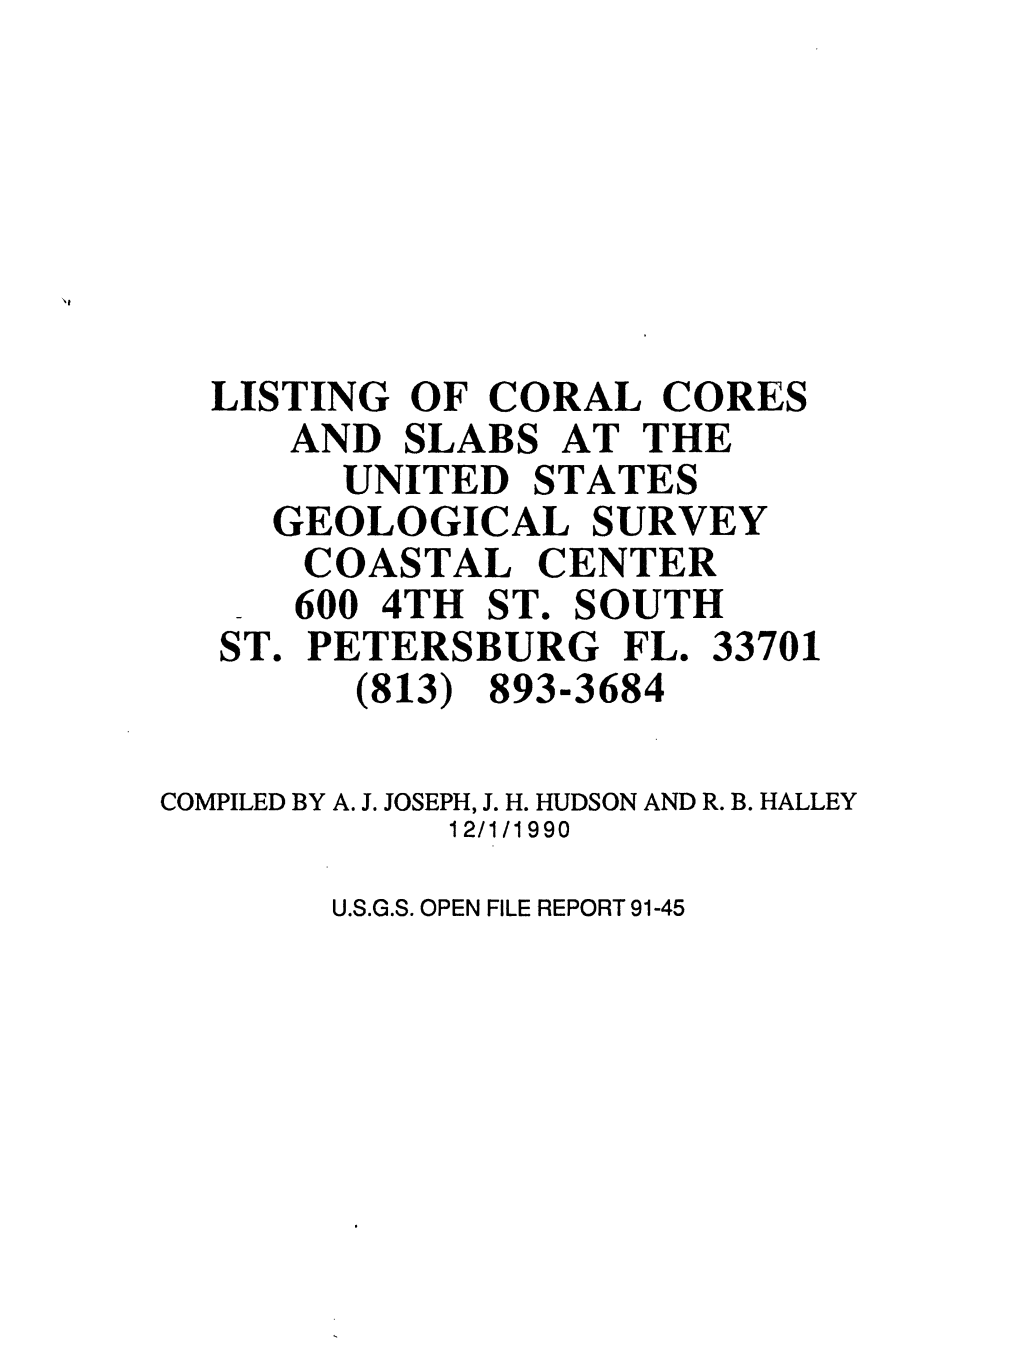 Listing of Coral Cores and Slabs at the United States Geological Survey Coastal Center 600 4Th St